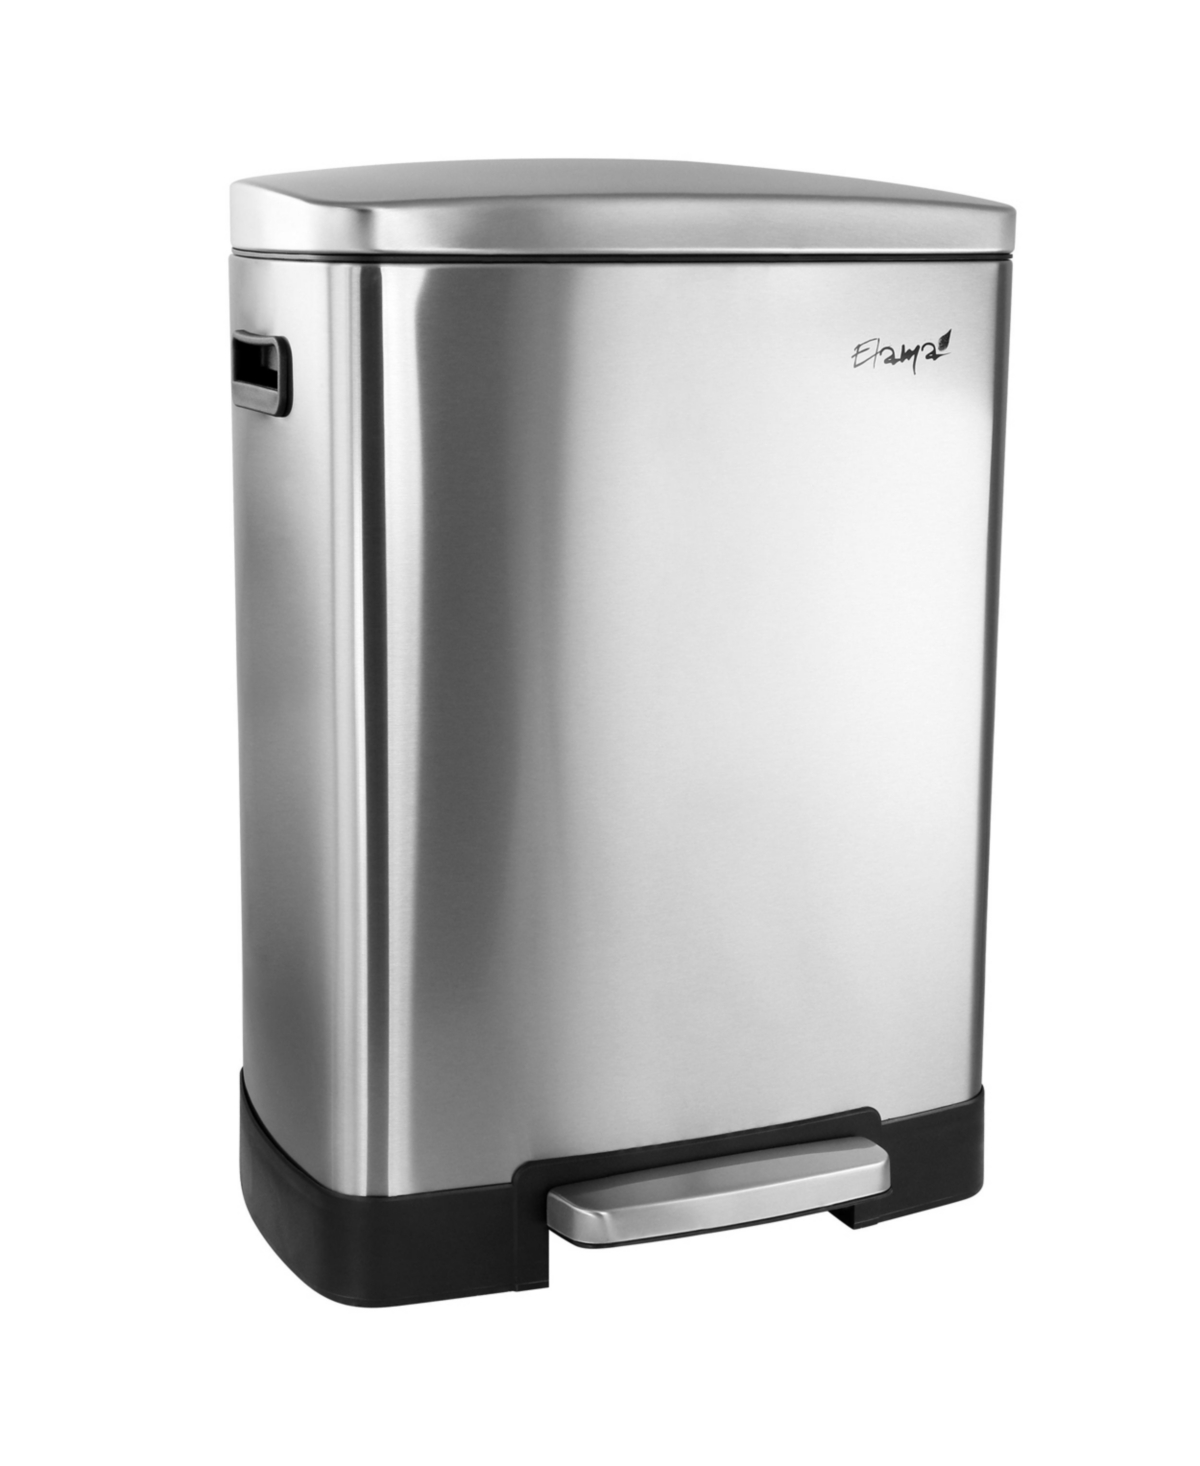 40 Liter 2 Compartment Large 10.6 Gallon Split Stainless Steel Step Trash Bin with Slow Close Mechanism - Silver